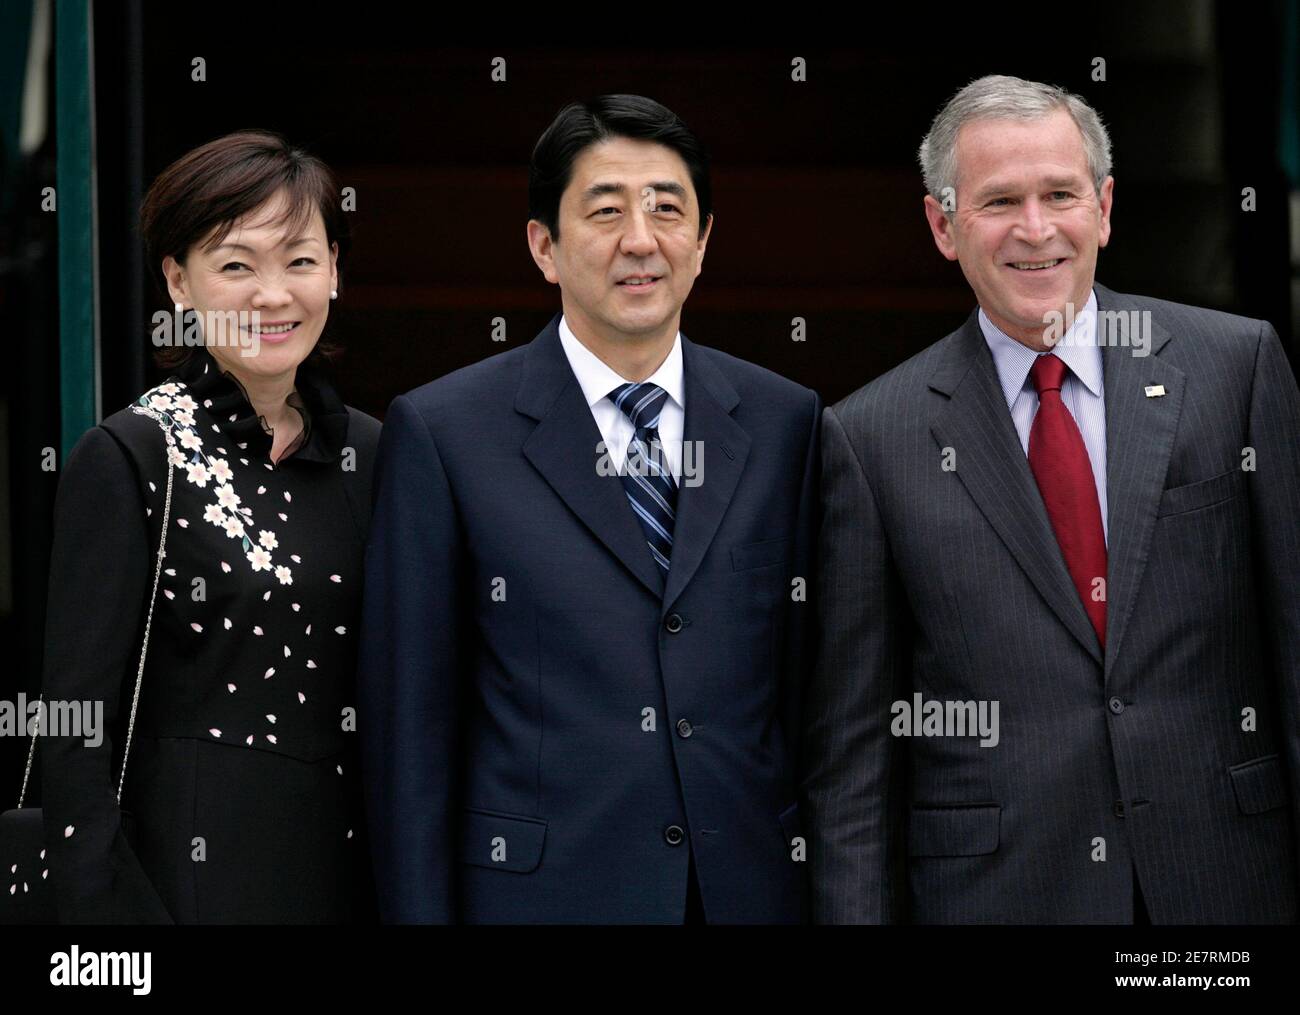 Japan's Prime Minister Shinzo Abe (C) and his wife Akie are welcomed by U.S. President George W. Bush (R) outside of the White House in Washington, April 26, 2007. REUTERS/Yuri Gripas (UNITED STATES) Stock Photo